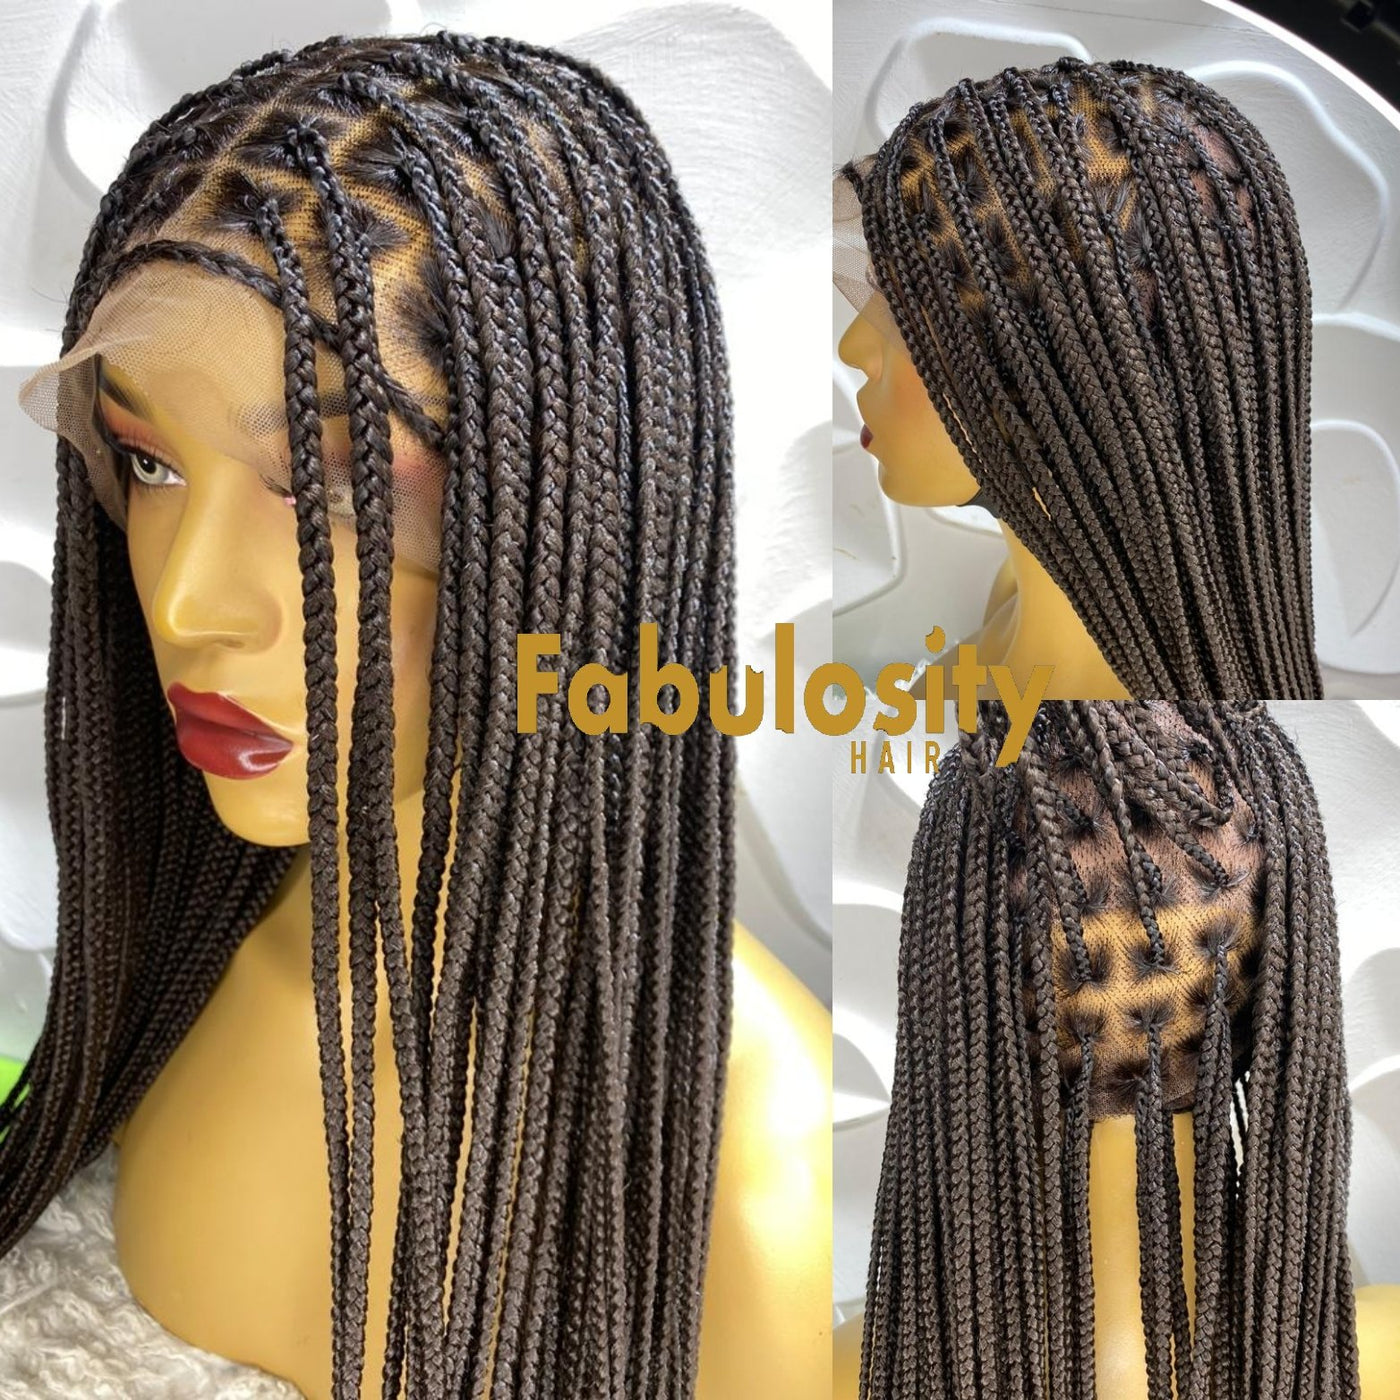 Knotless Full lace Braided Wig (Colour 4)